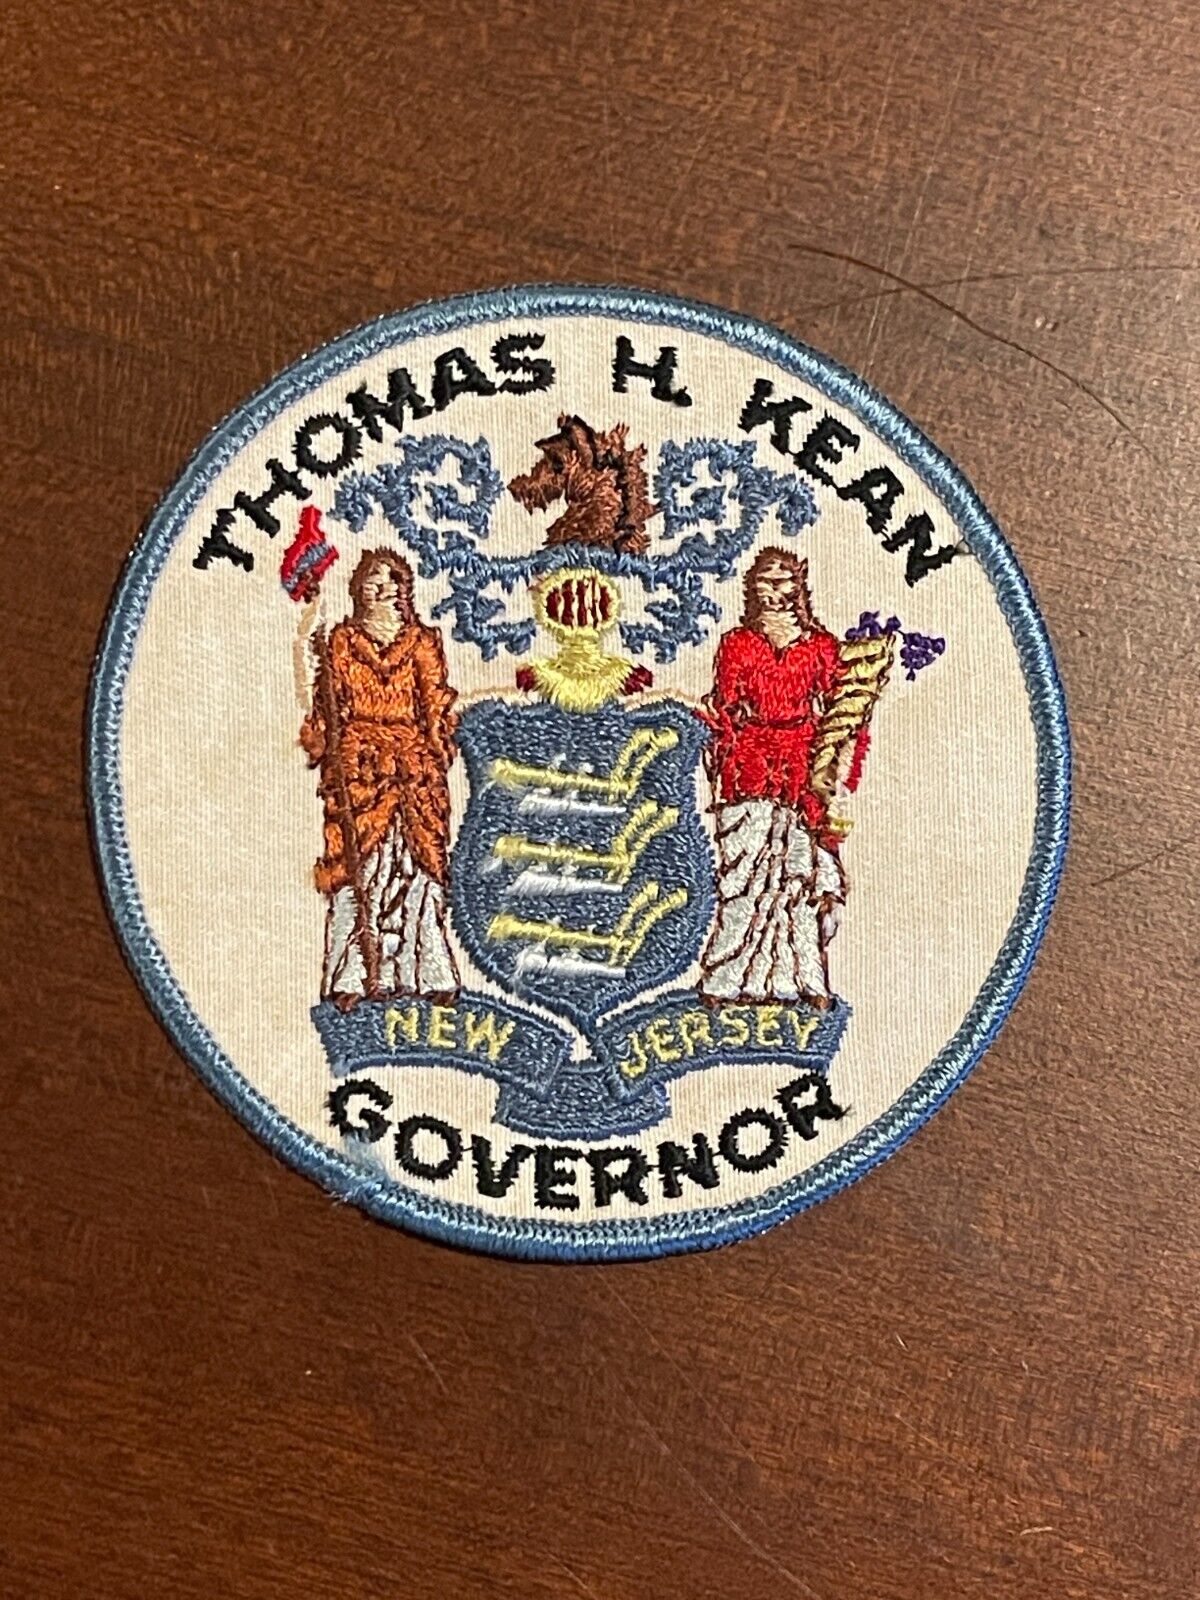 VINTAGE THOMAS H. KEAN NEW JERSEY REPUBLICAN GOVERNOR 1980s POLITICAL PATCH